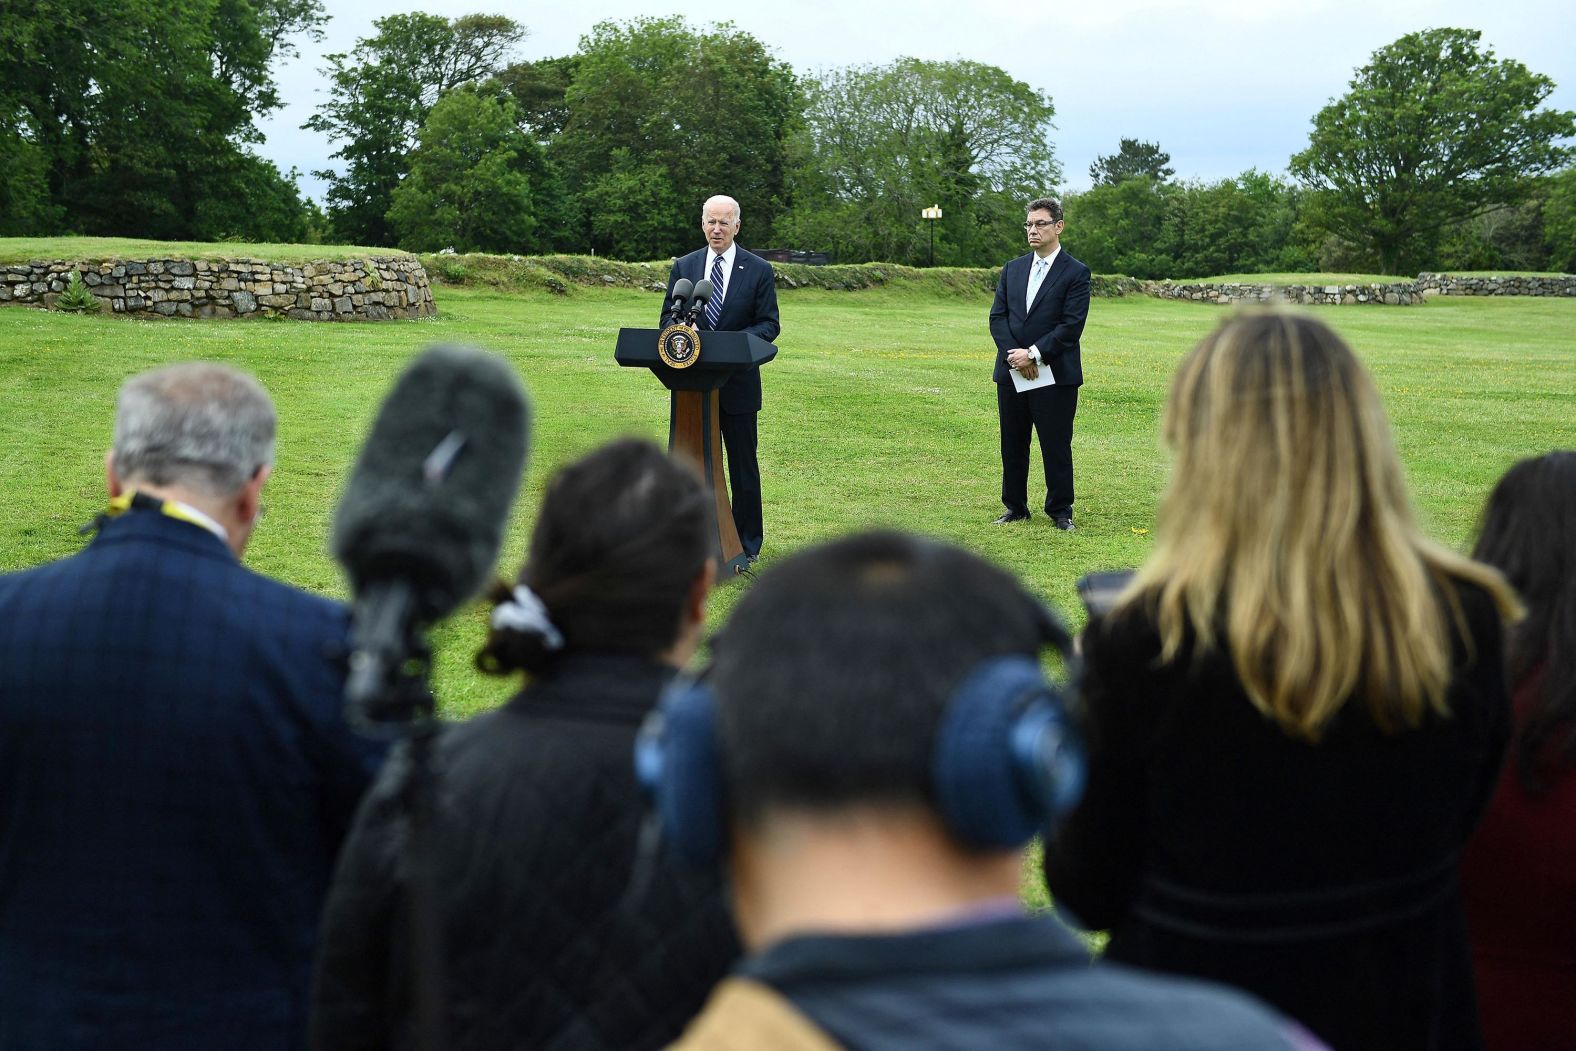 Biden delivers a speech about Covid-19 as Pfizer CEO Albert Bourla stands alongside him Thursday in St. Ives, England. Biden announced that the United States <a href="index.php?page=&url=https%3A%2F%2Fwww.cnn.com%2F2021%2F06%2F10%2Fpolitics%2Fjoe-biden-vaccine-us-leadership%2Findex.html" target="_blank">plans to donate 500 million doses of Pfizer's Covid-19 vaccine globally</a> as part of his efforts to reassert US leadership on the world stage.